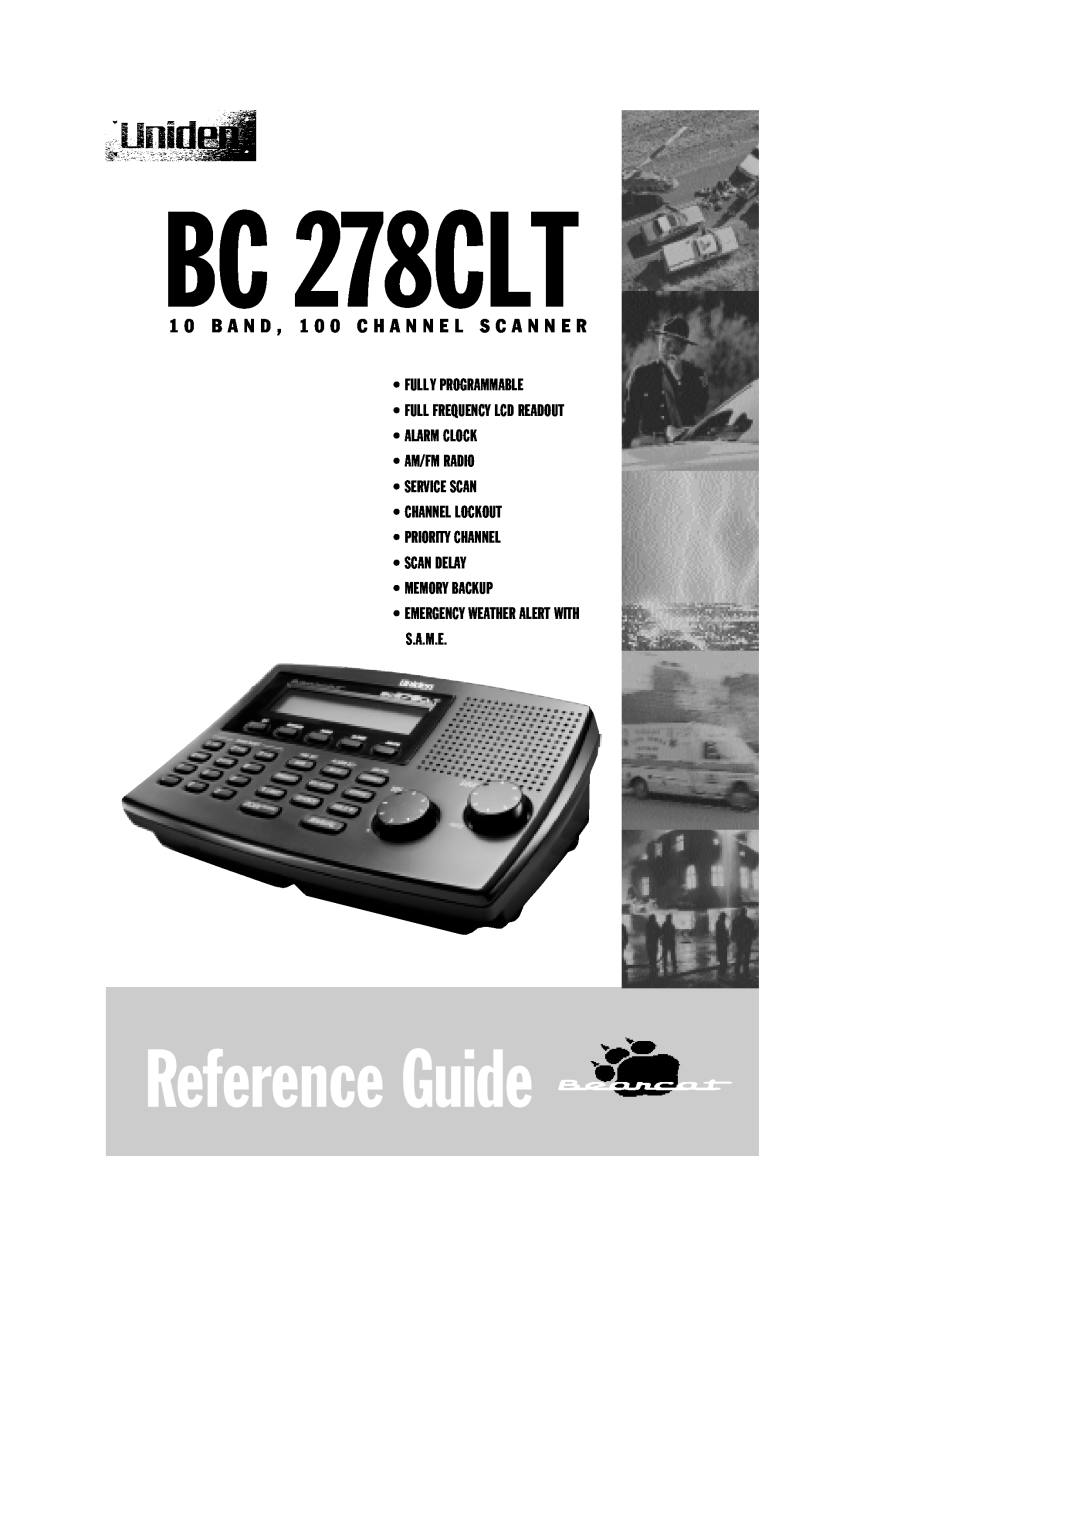 Uniden BC 278CLT manual Reference Guide, 1 0 B A N D , 1 0 0 C H A N N E L S C A N N E R, Memory Backup 